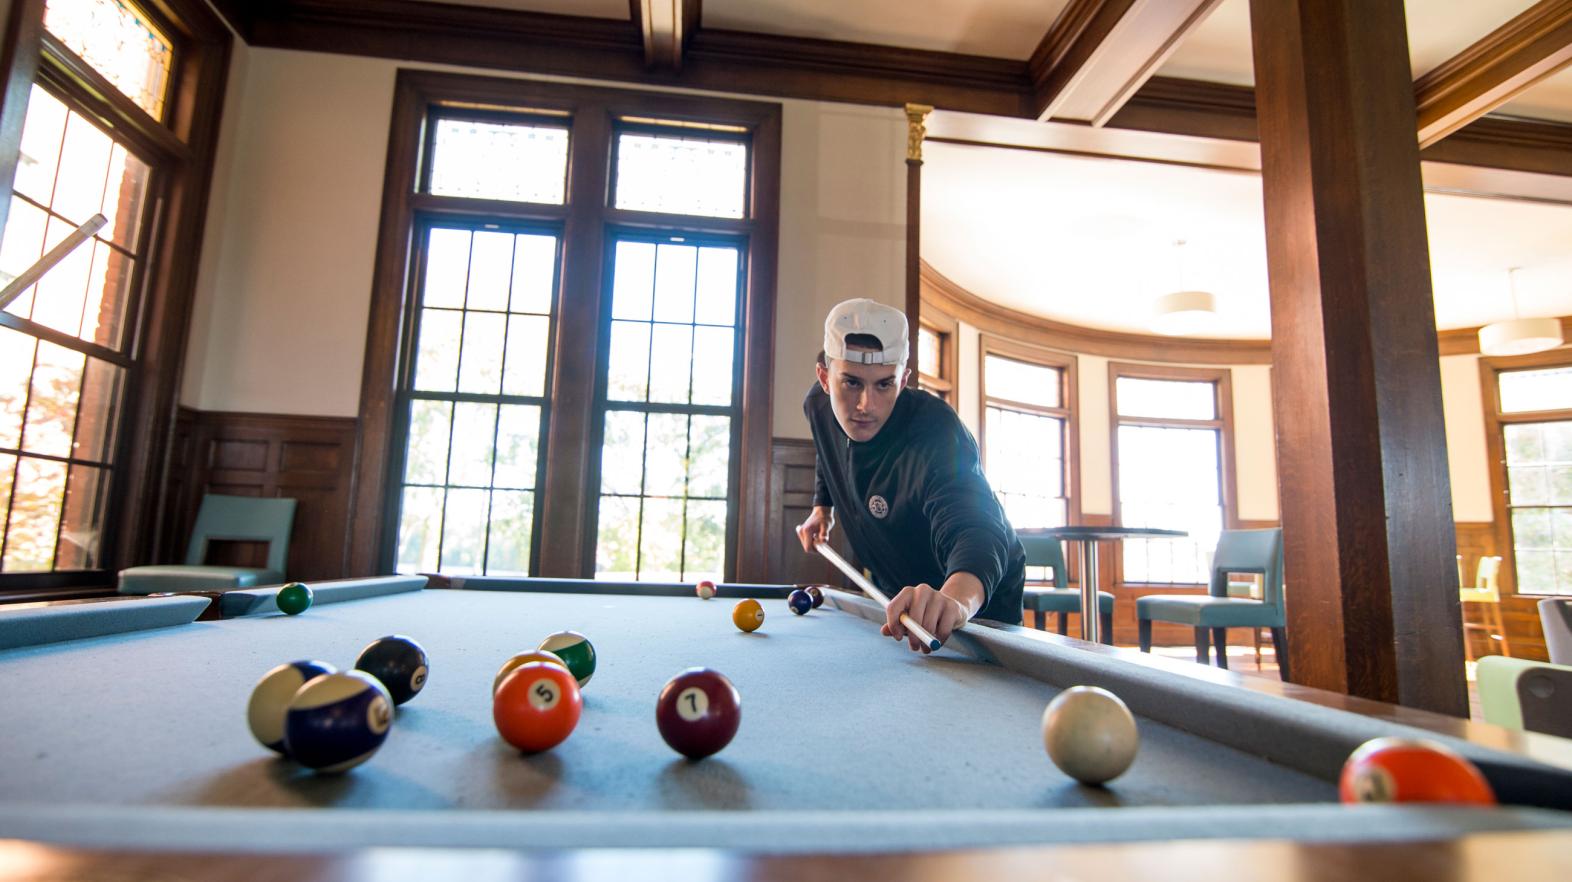 A student plays pool in Carlisle Foyer in the Alumni Hall residence hall.